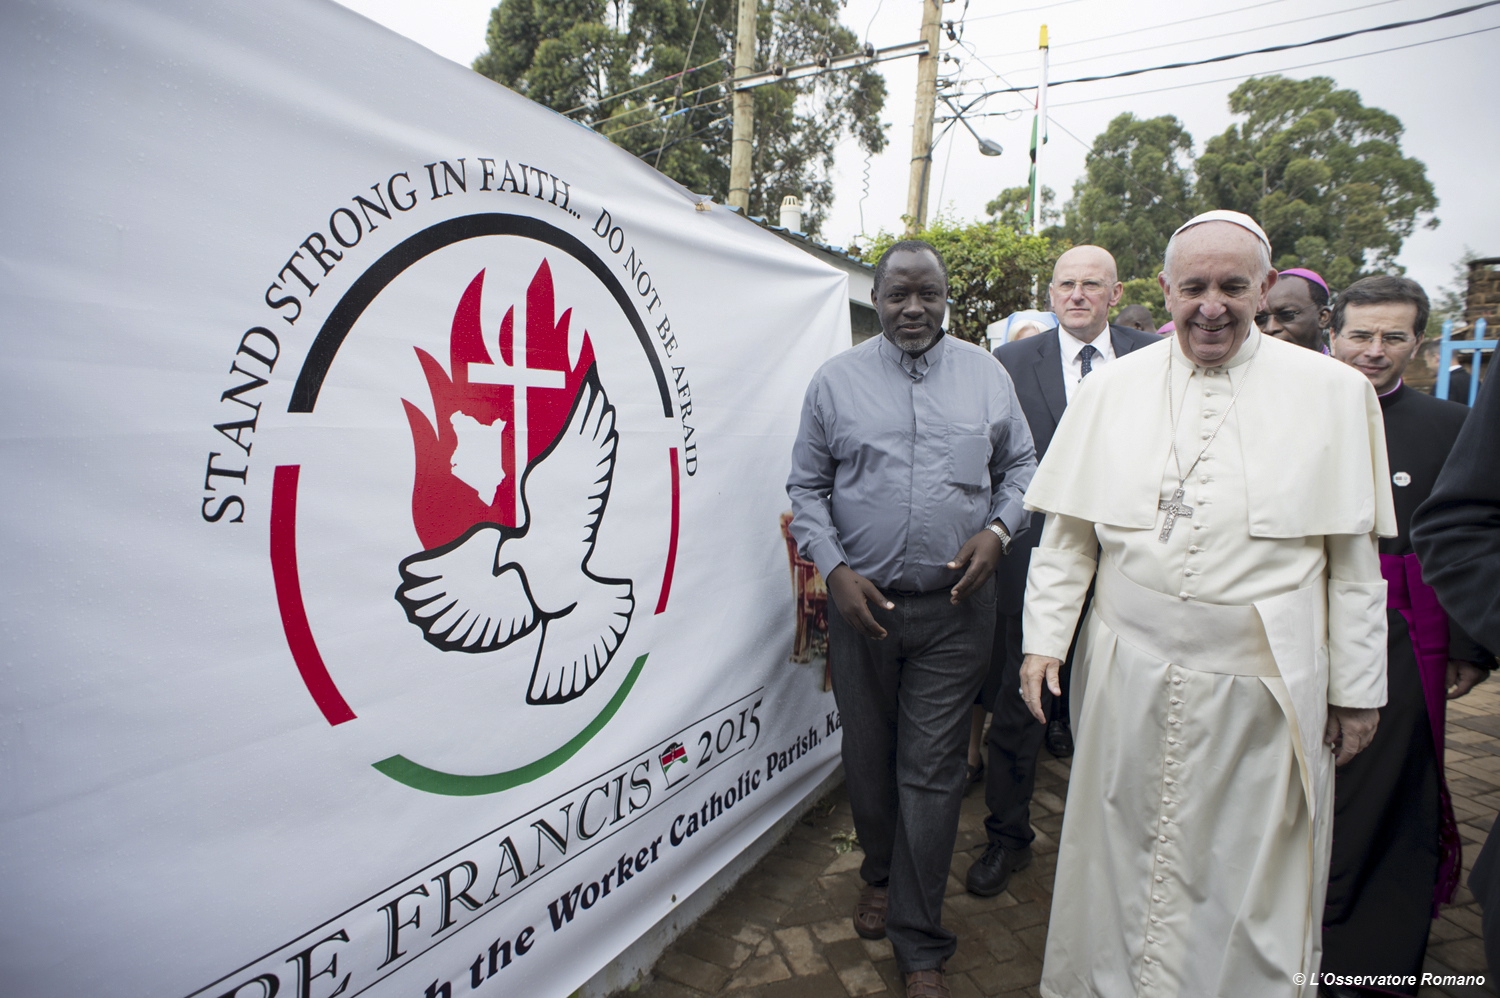 Pope Francis arrives Friday for his visit to Kangemi, one of the 11 slums dotting Nairobi, Kenya. Pope Francis denounced the conditions slum-dwellers are forced to live in, saying Friday that access to safe water is a basic human right and that everyone should have dignified, adequate housing.